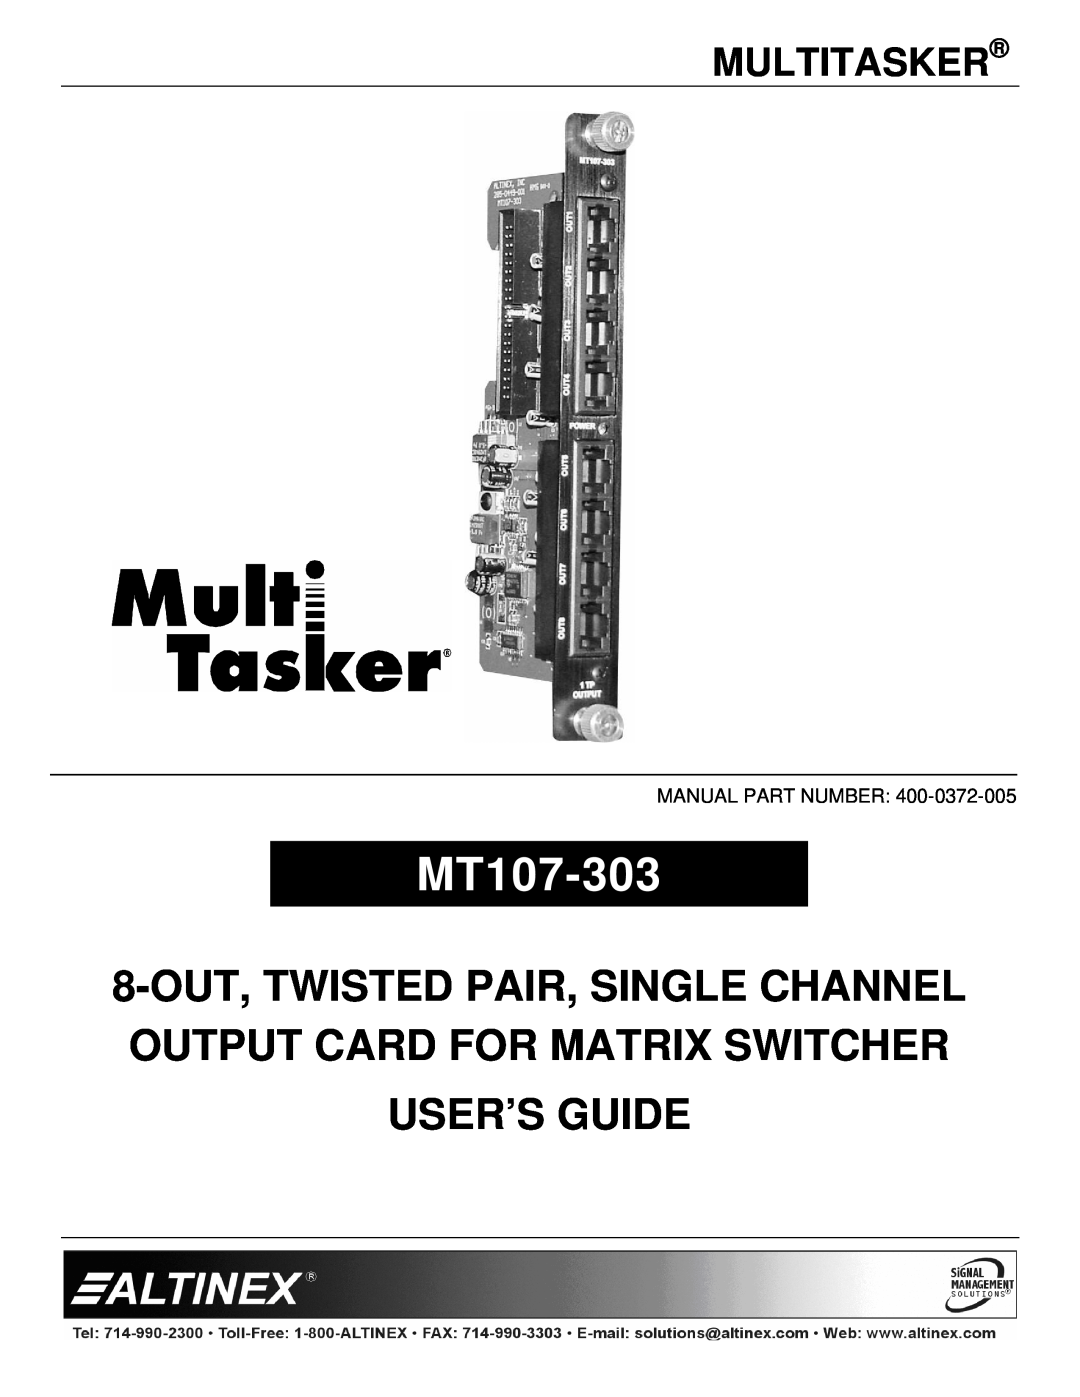 Altinex MT107-303 manual Multitasker, 8-OUT, TWISTED PAIR, SINGLE CHANNEL OUTPUT CARD FOR MATRIX SWITCHER, User’S Guide 